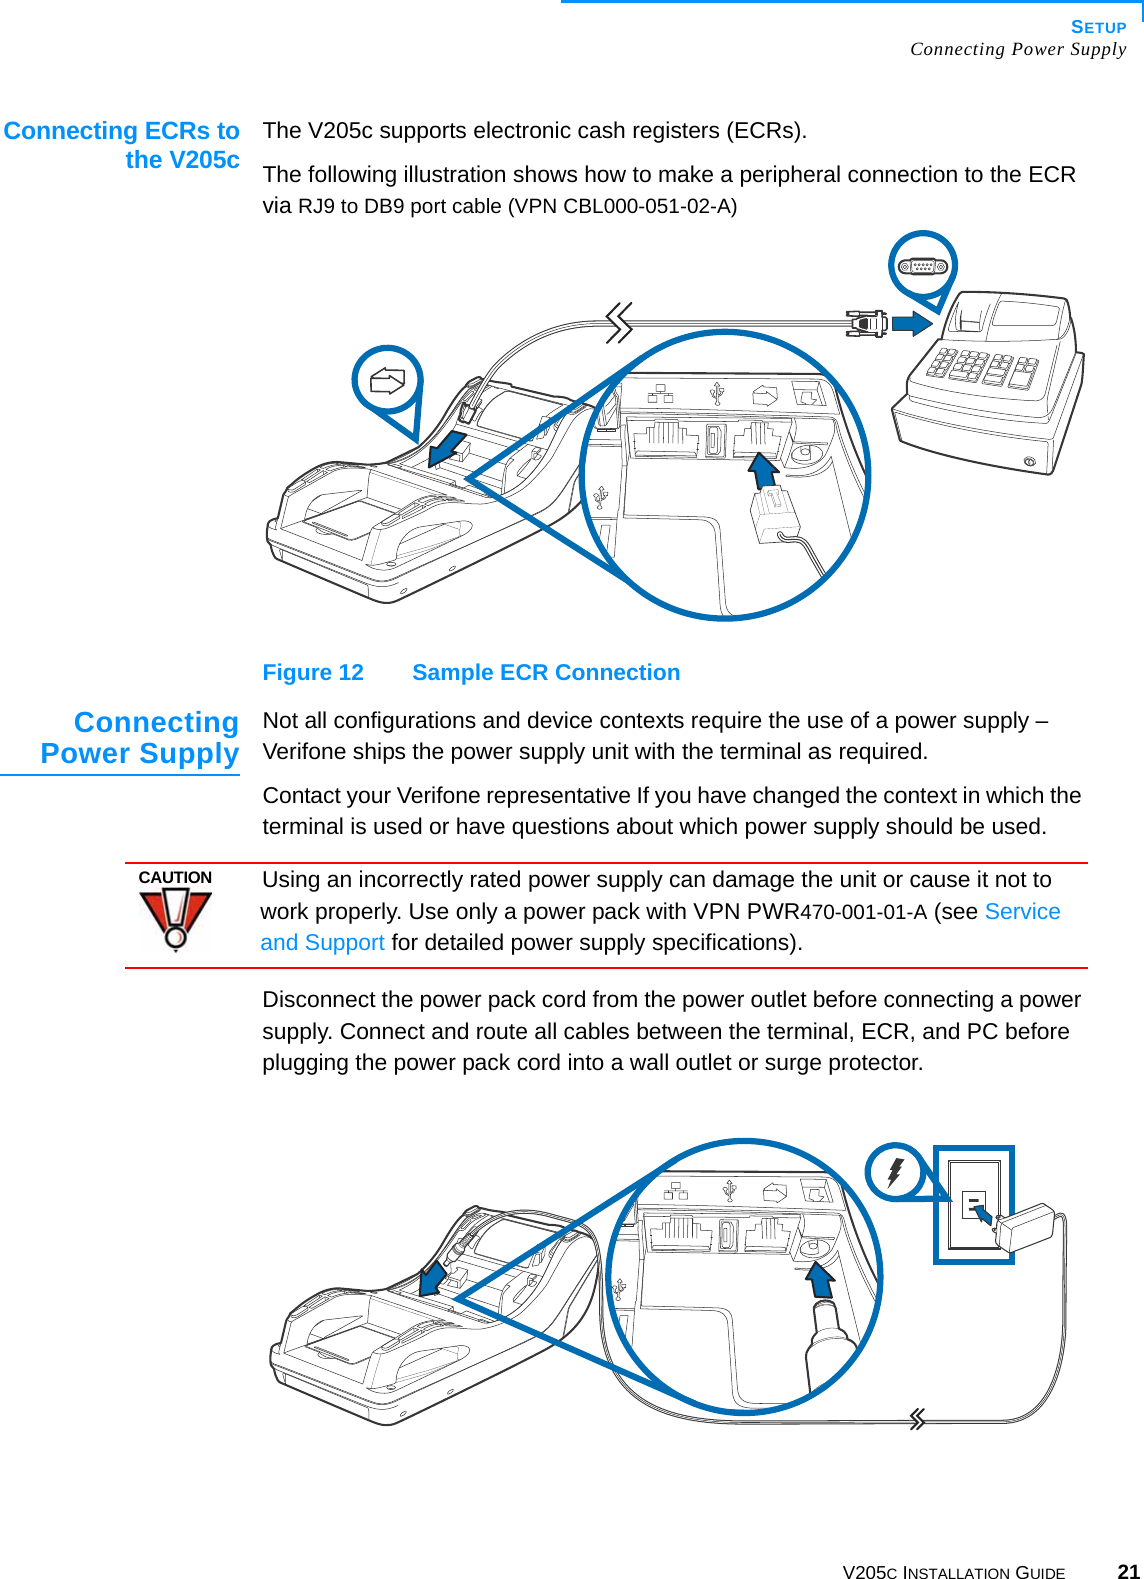 SETUPConnecting Power SupplyV205C INSTALLATION GUIDE 21Connecting ECRs tothe V205cThe V205c supports electronic cash registers (ECRs).The following illustration shows how to make a peripheral connection to the ECR via RJ9 to DB9 port cable (VPN CBL000-051-02-A)Figure 12 Sample ECR ConnectionConnectingPower Supply Not all configurations and device contexts require the use of a power supply – Verifone ships the power supply unit with the terminal as required.Contact your Verifone representative If you have changed the context in which the terminal is used or have questions about which power supply should be used.Disconnect the power pack cord from the power outlet before connecting a power supply. Connect and route all cables between the terminal, ECR, and PC before plugging the power pack cord into a wall outlet or surge protector.CAUTIONUsing an incorrectly rated power supply can damage the unit or cause it not to work properly. Use only a power pack with VPN PWR470-001-01-A (see Service and Support for detailed power supply specifications).